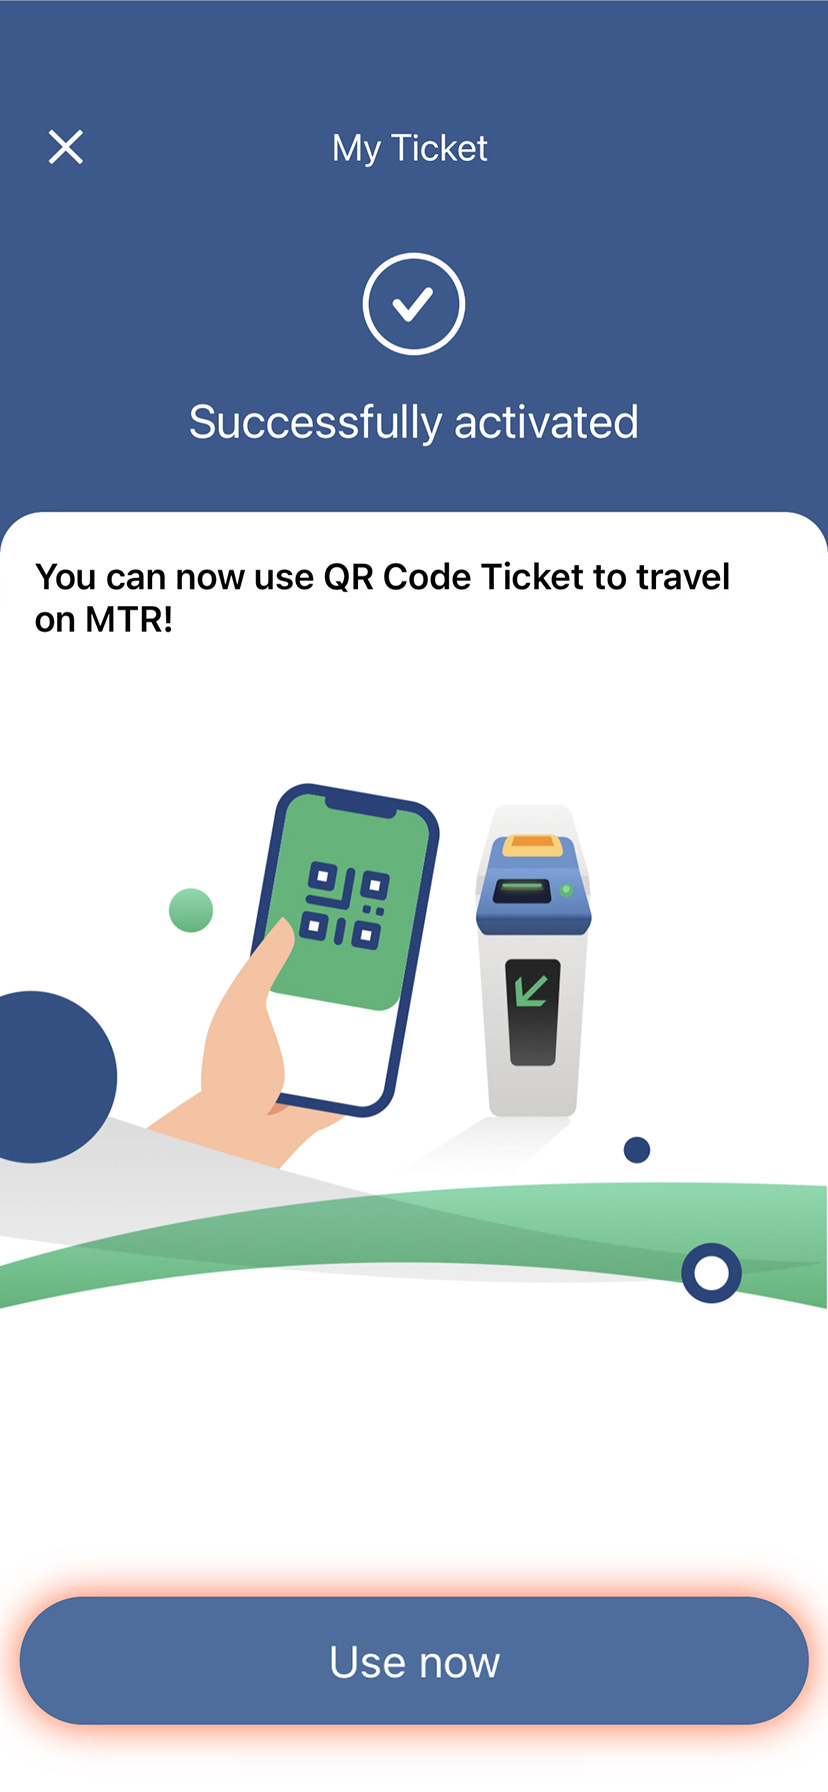 Upon successful authentication, you will be redirected to MTR
                                                Mobile. Tap 'Use now' and start using the QR Code Ticket